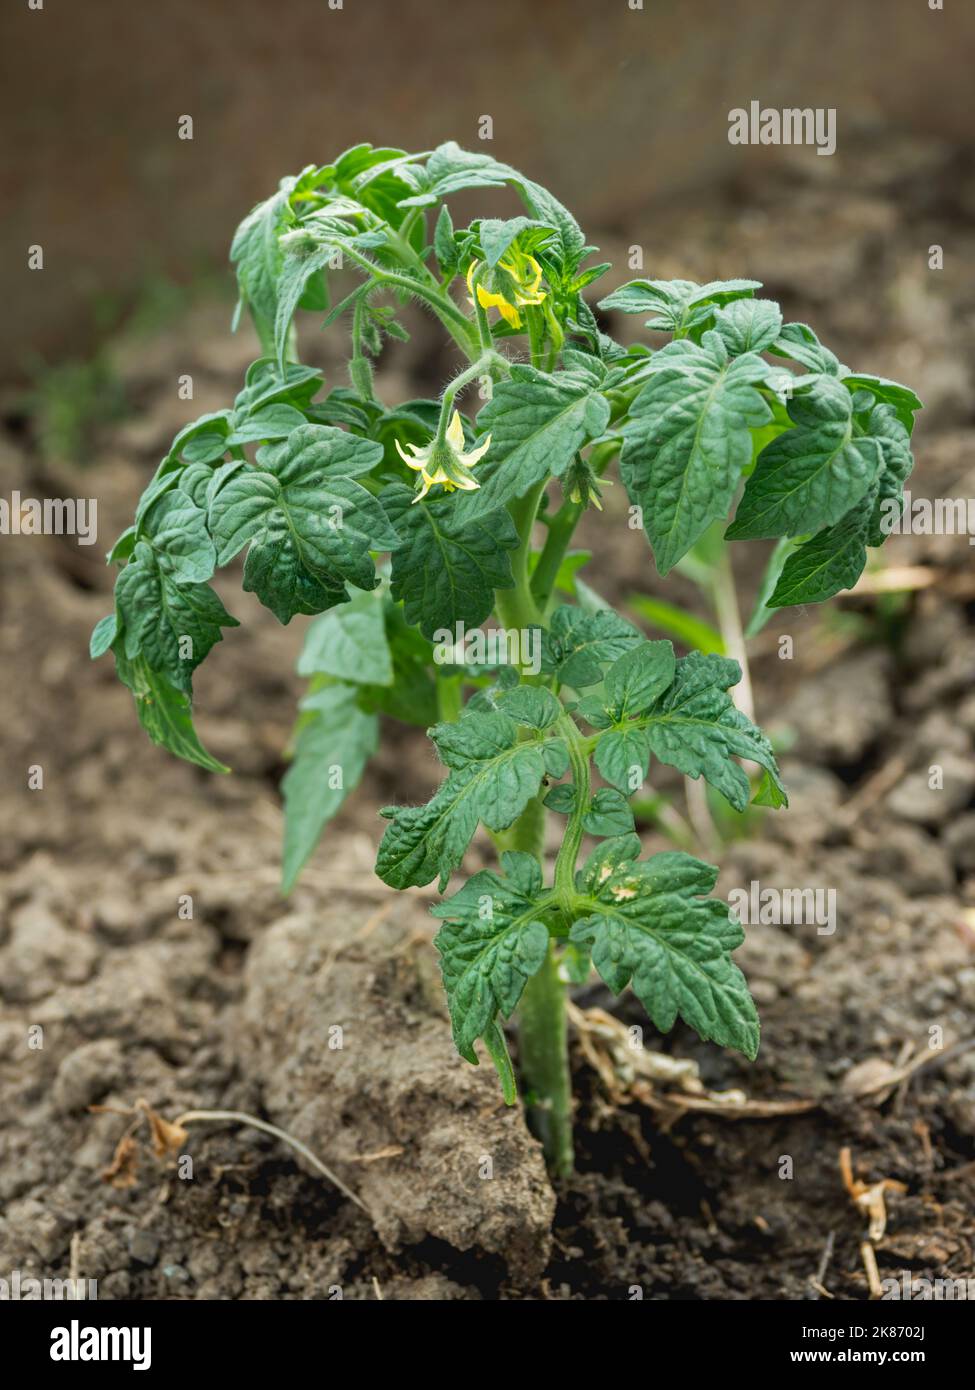 Potato in open ground. Green fresh leaves of edible plant. Gardening at spring and summer. Growing organic food. Stock Photo